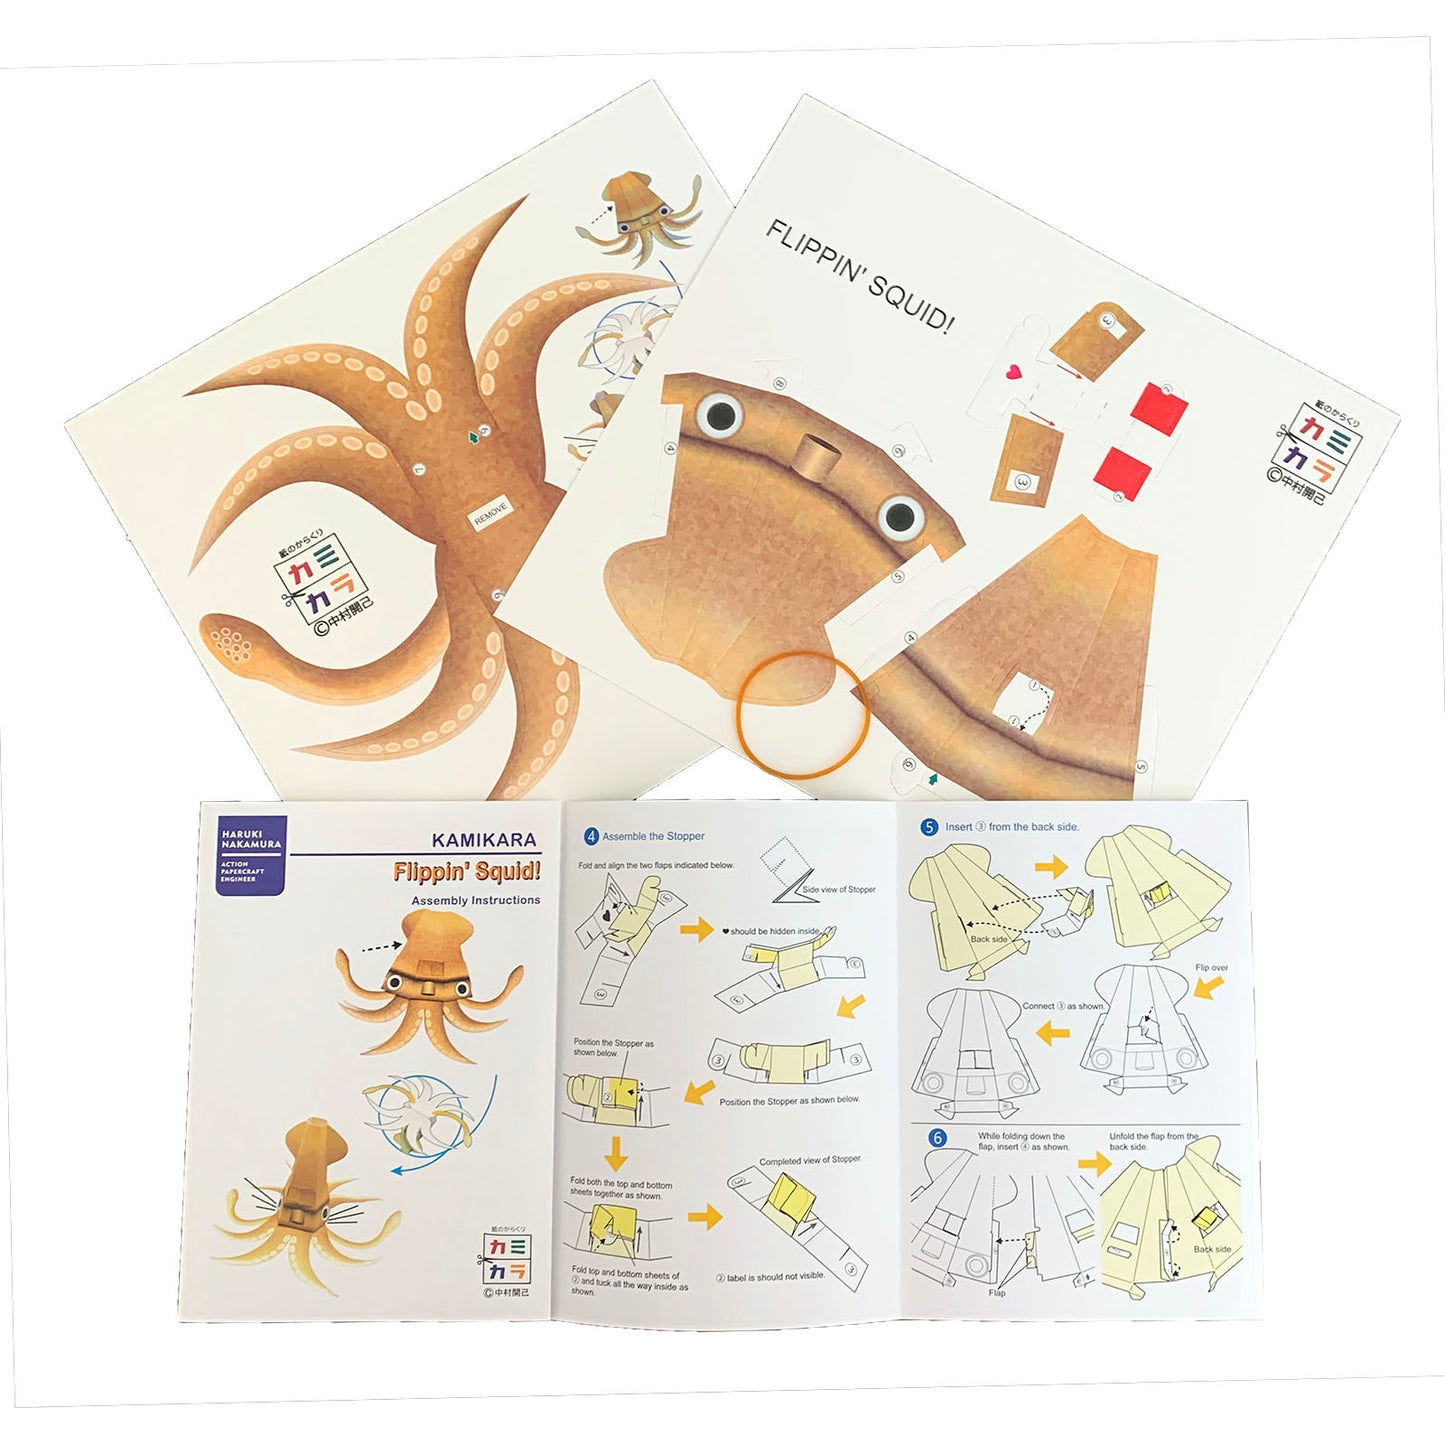 Contents of Flippin Squid kit with instruction booklet